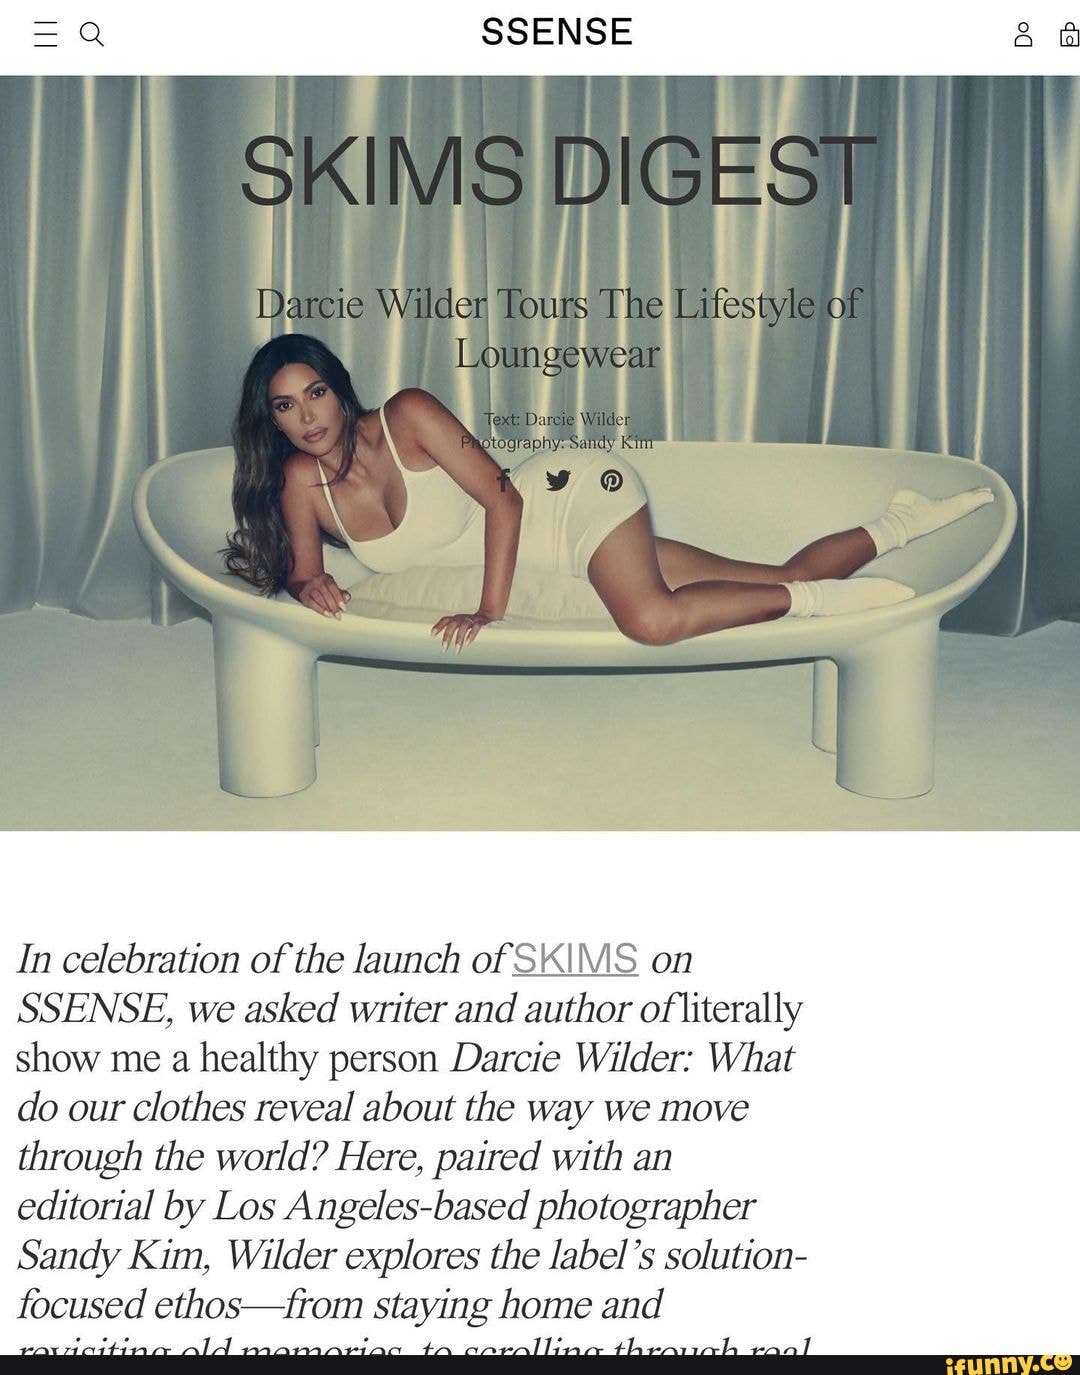 Pp SSENSE SKIMS DIGEST Wilder In celebration of the launch of